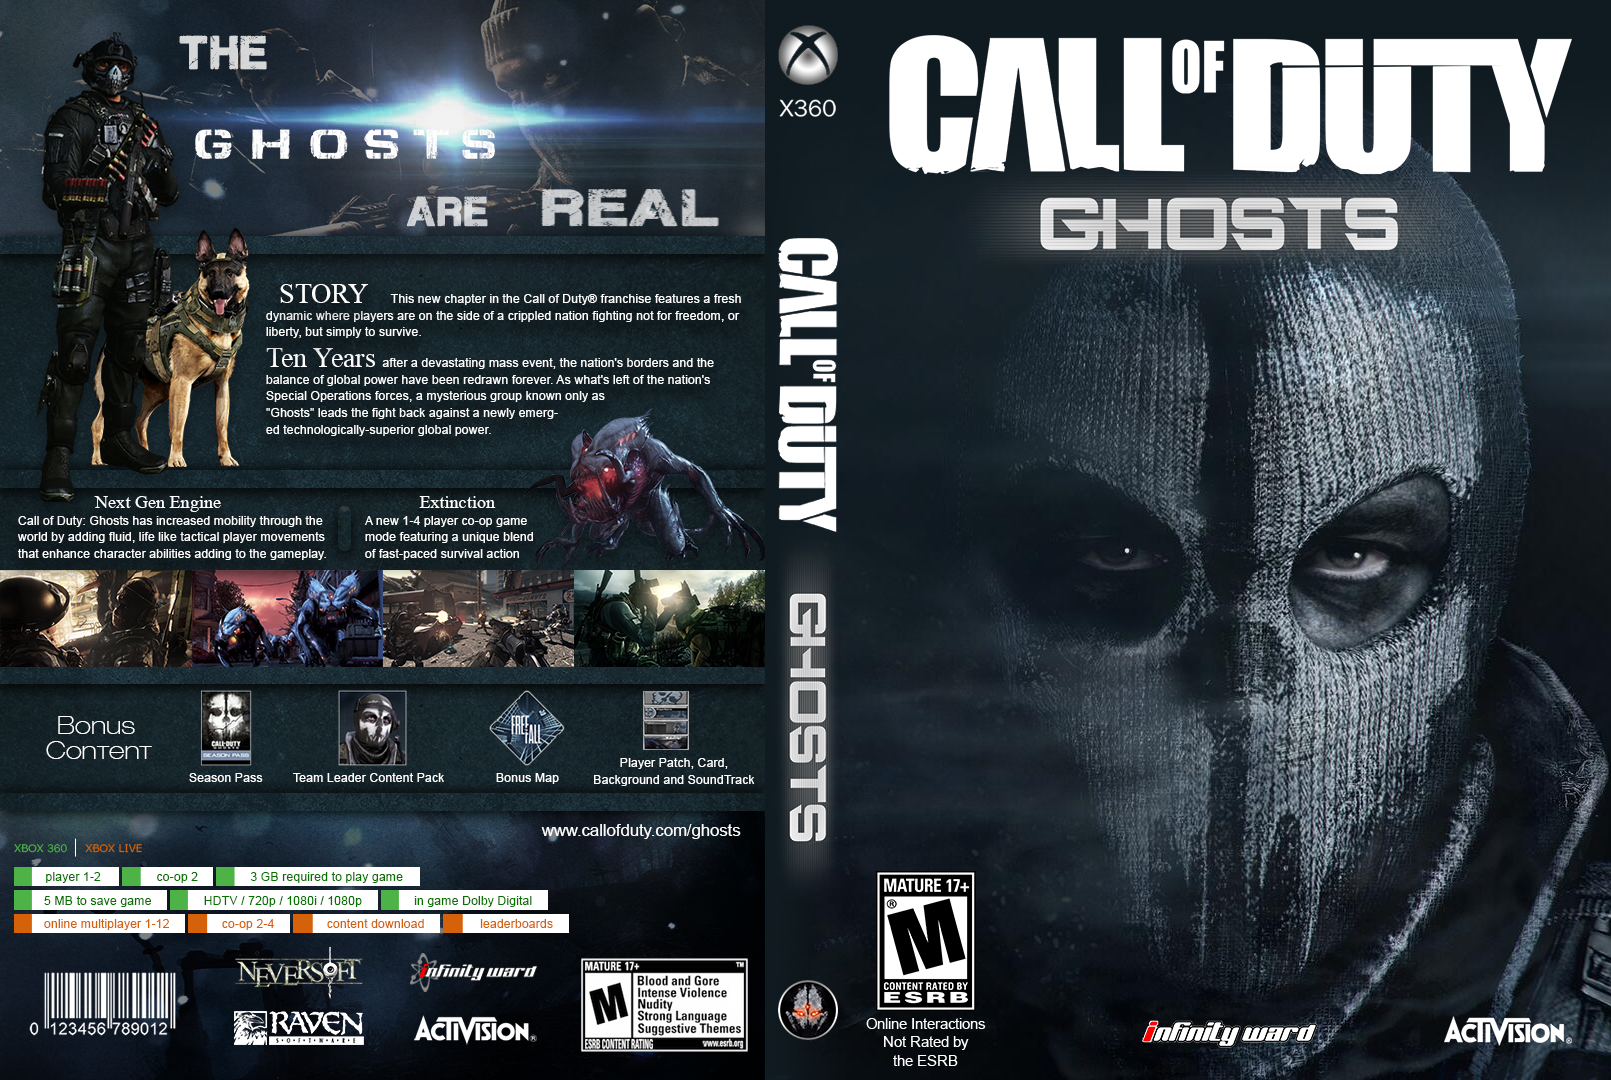 Call of duty xbox game. Call of Duty Ghosts Xbox 360. Call of Duty диск на иксбокс 360. Call of Duty Ghosts Xbox 360 обложка. Call of Duty диск на Xbox 360.